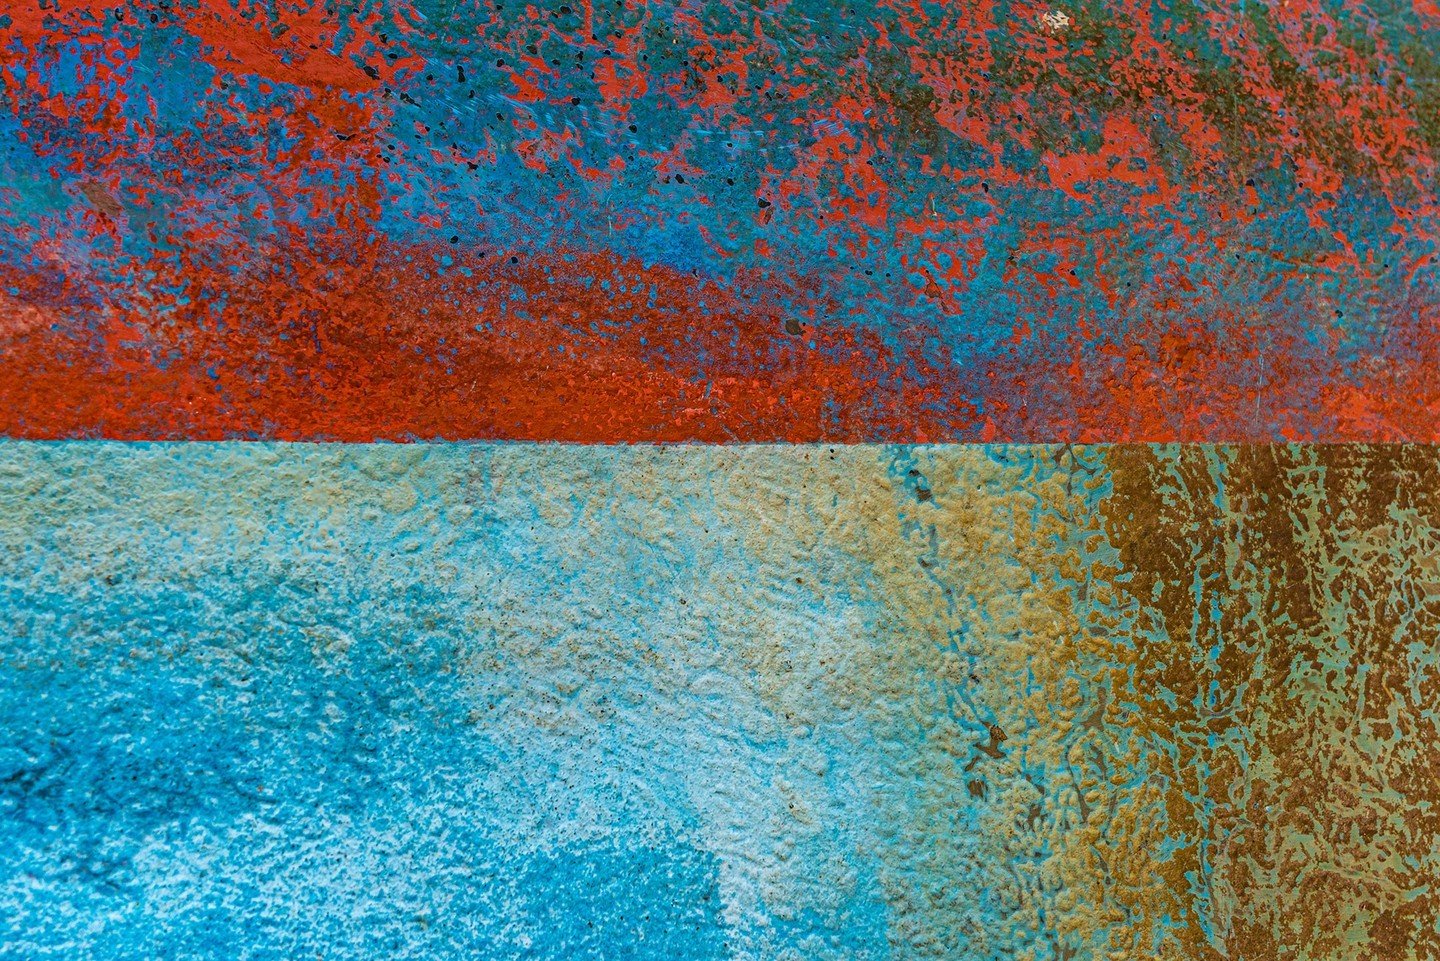 I love the bold, contrasting turquoise blues, reds, and rusts in this collection of abstract photos of a fishing boat in St. John's, NL. Check out the Abstracts collection under the link in my bio for more like these!

#textures #abstract #nautical #